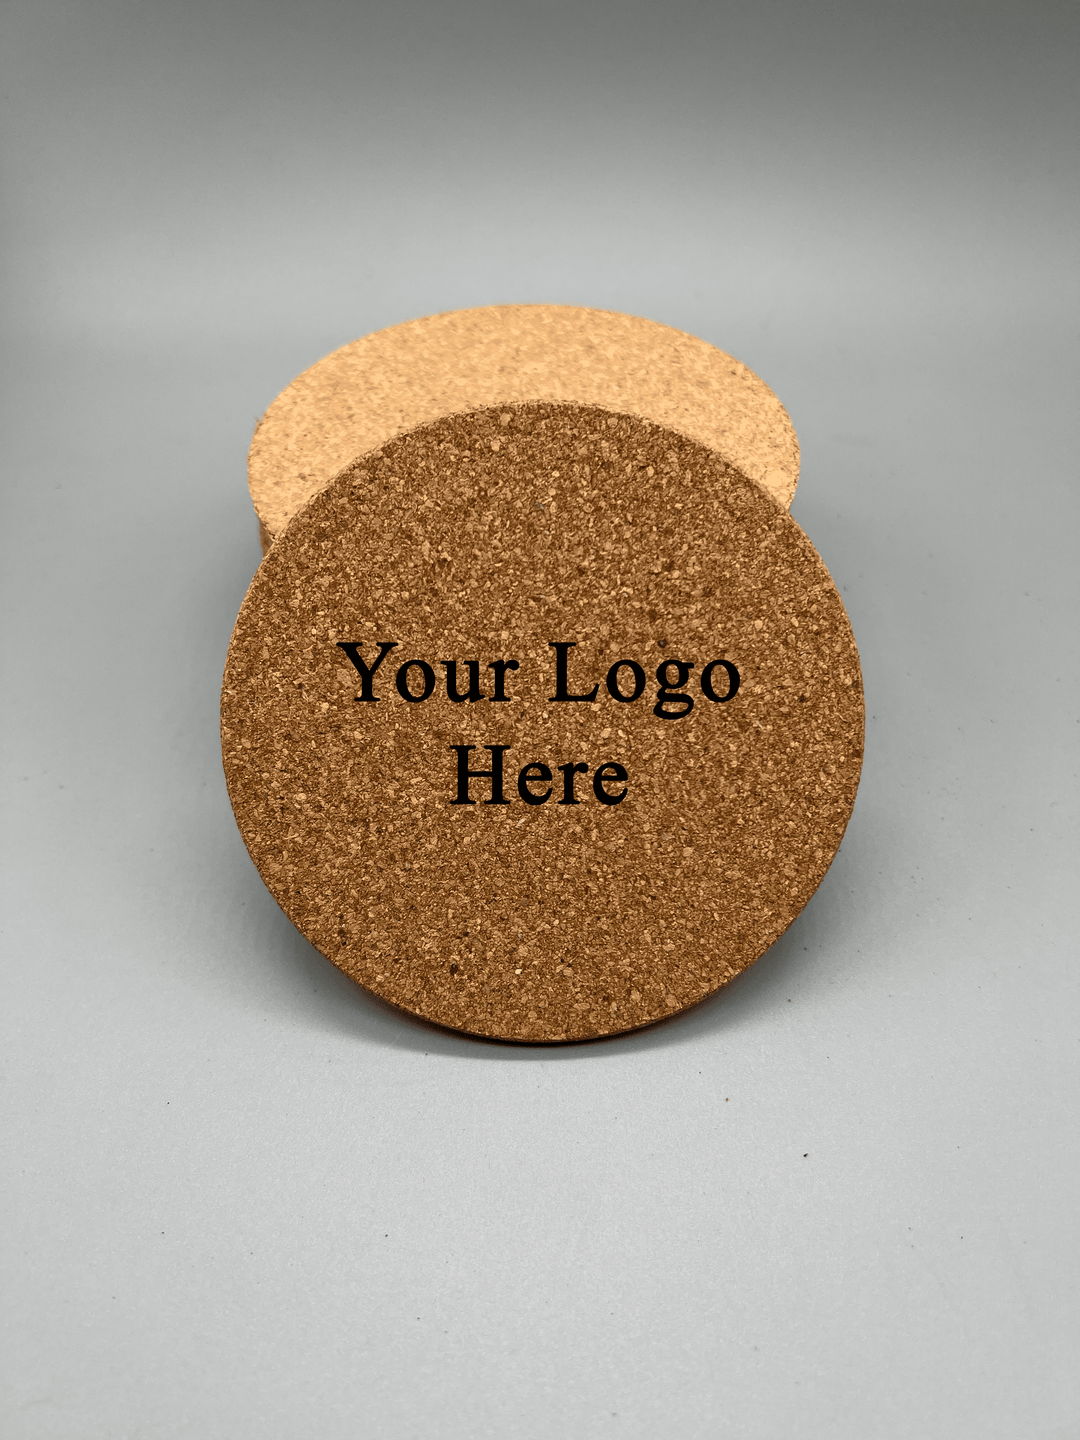 Custom Cork Coasters - Shop Personalized Cork Coasters at Totally